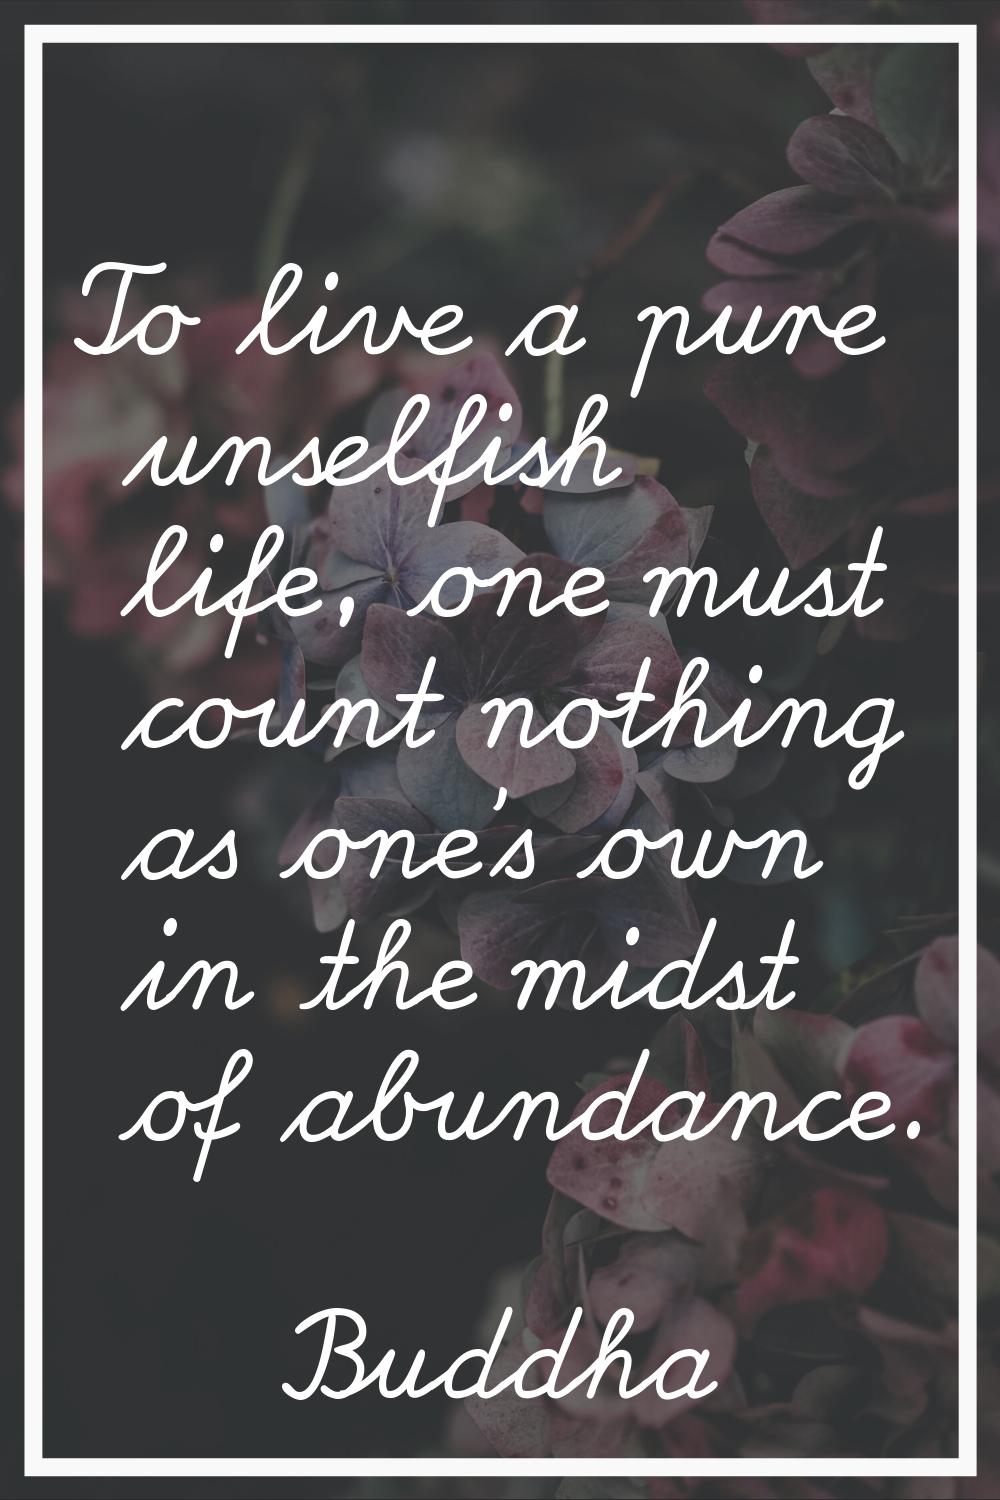 To live a pure unselfish life, one must count nothing as one's own in the midst of abundance.